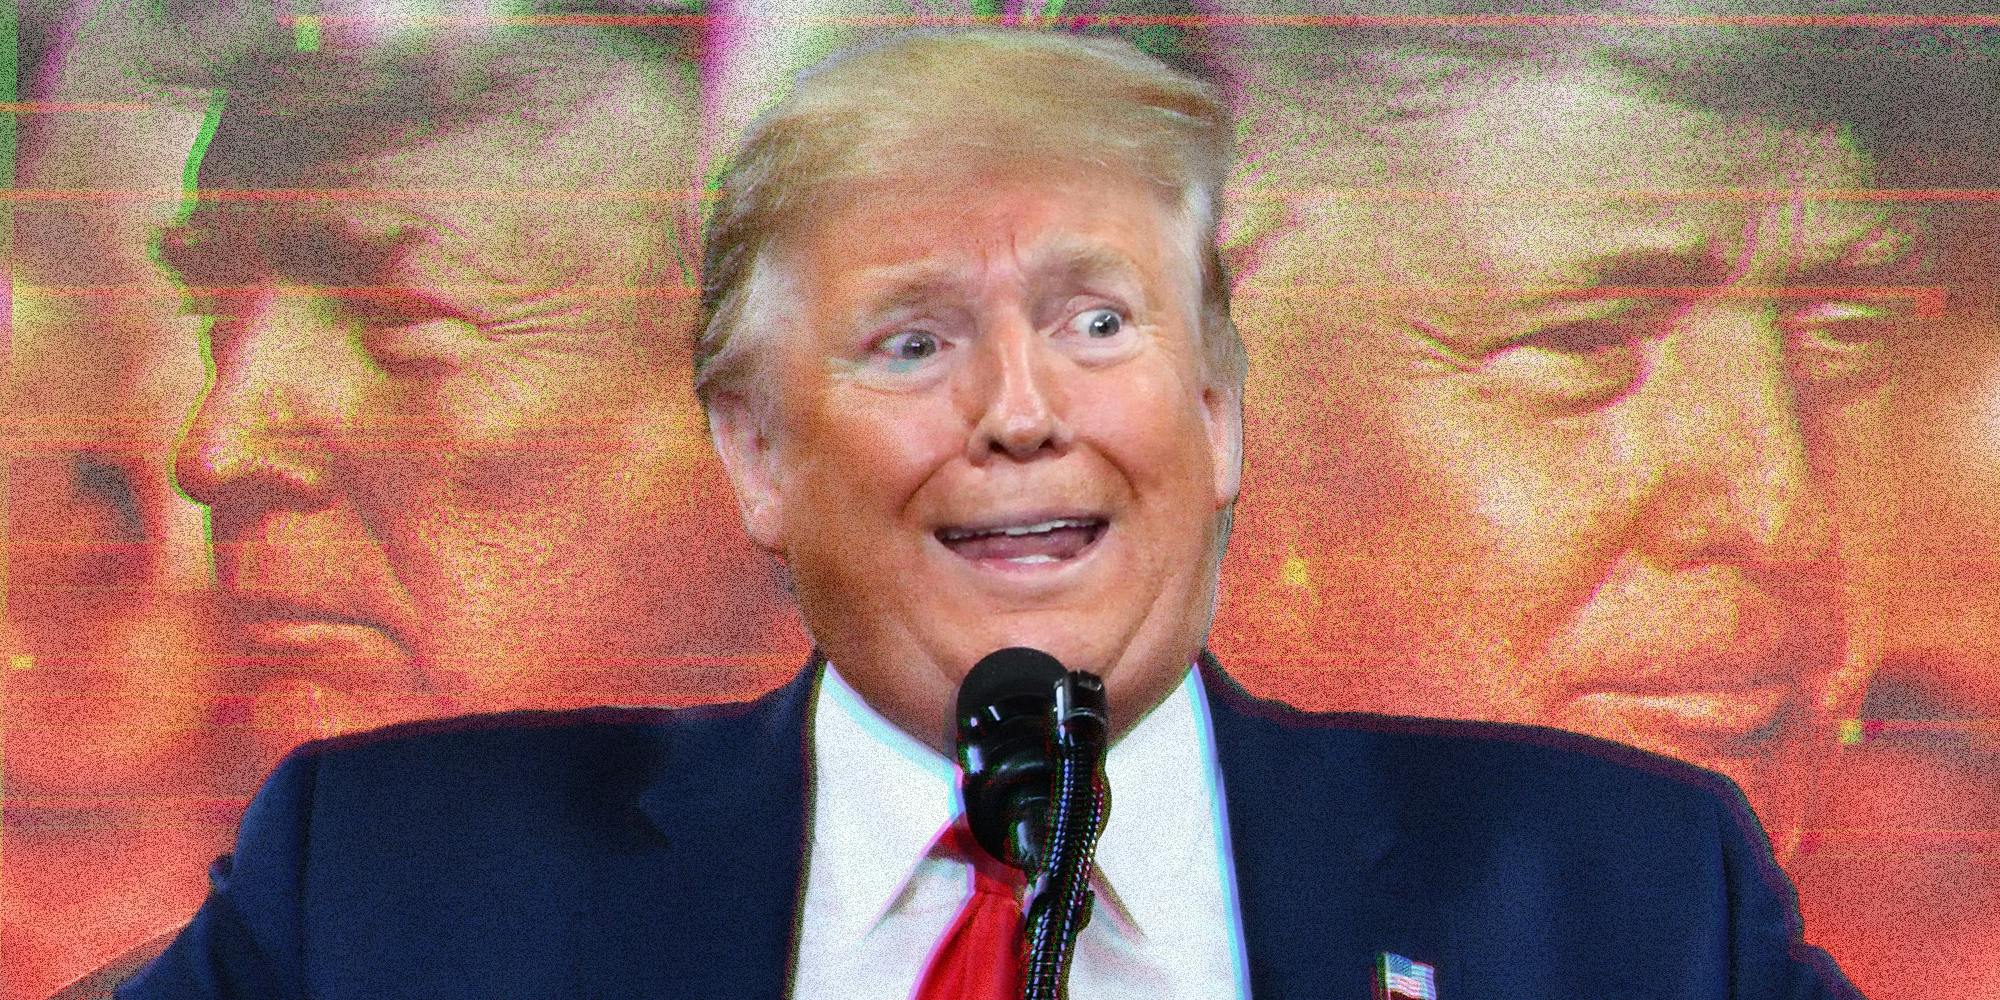 Donald Trump at microphone with deranged face, with other photos of him in the background facing different directions